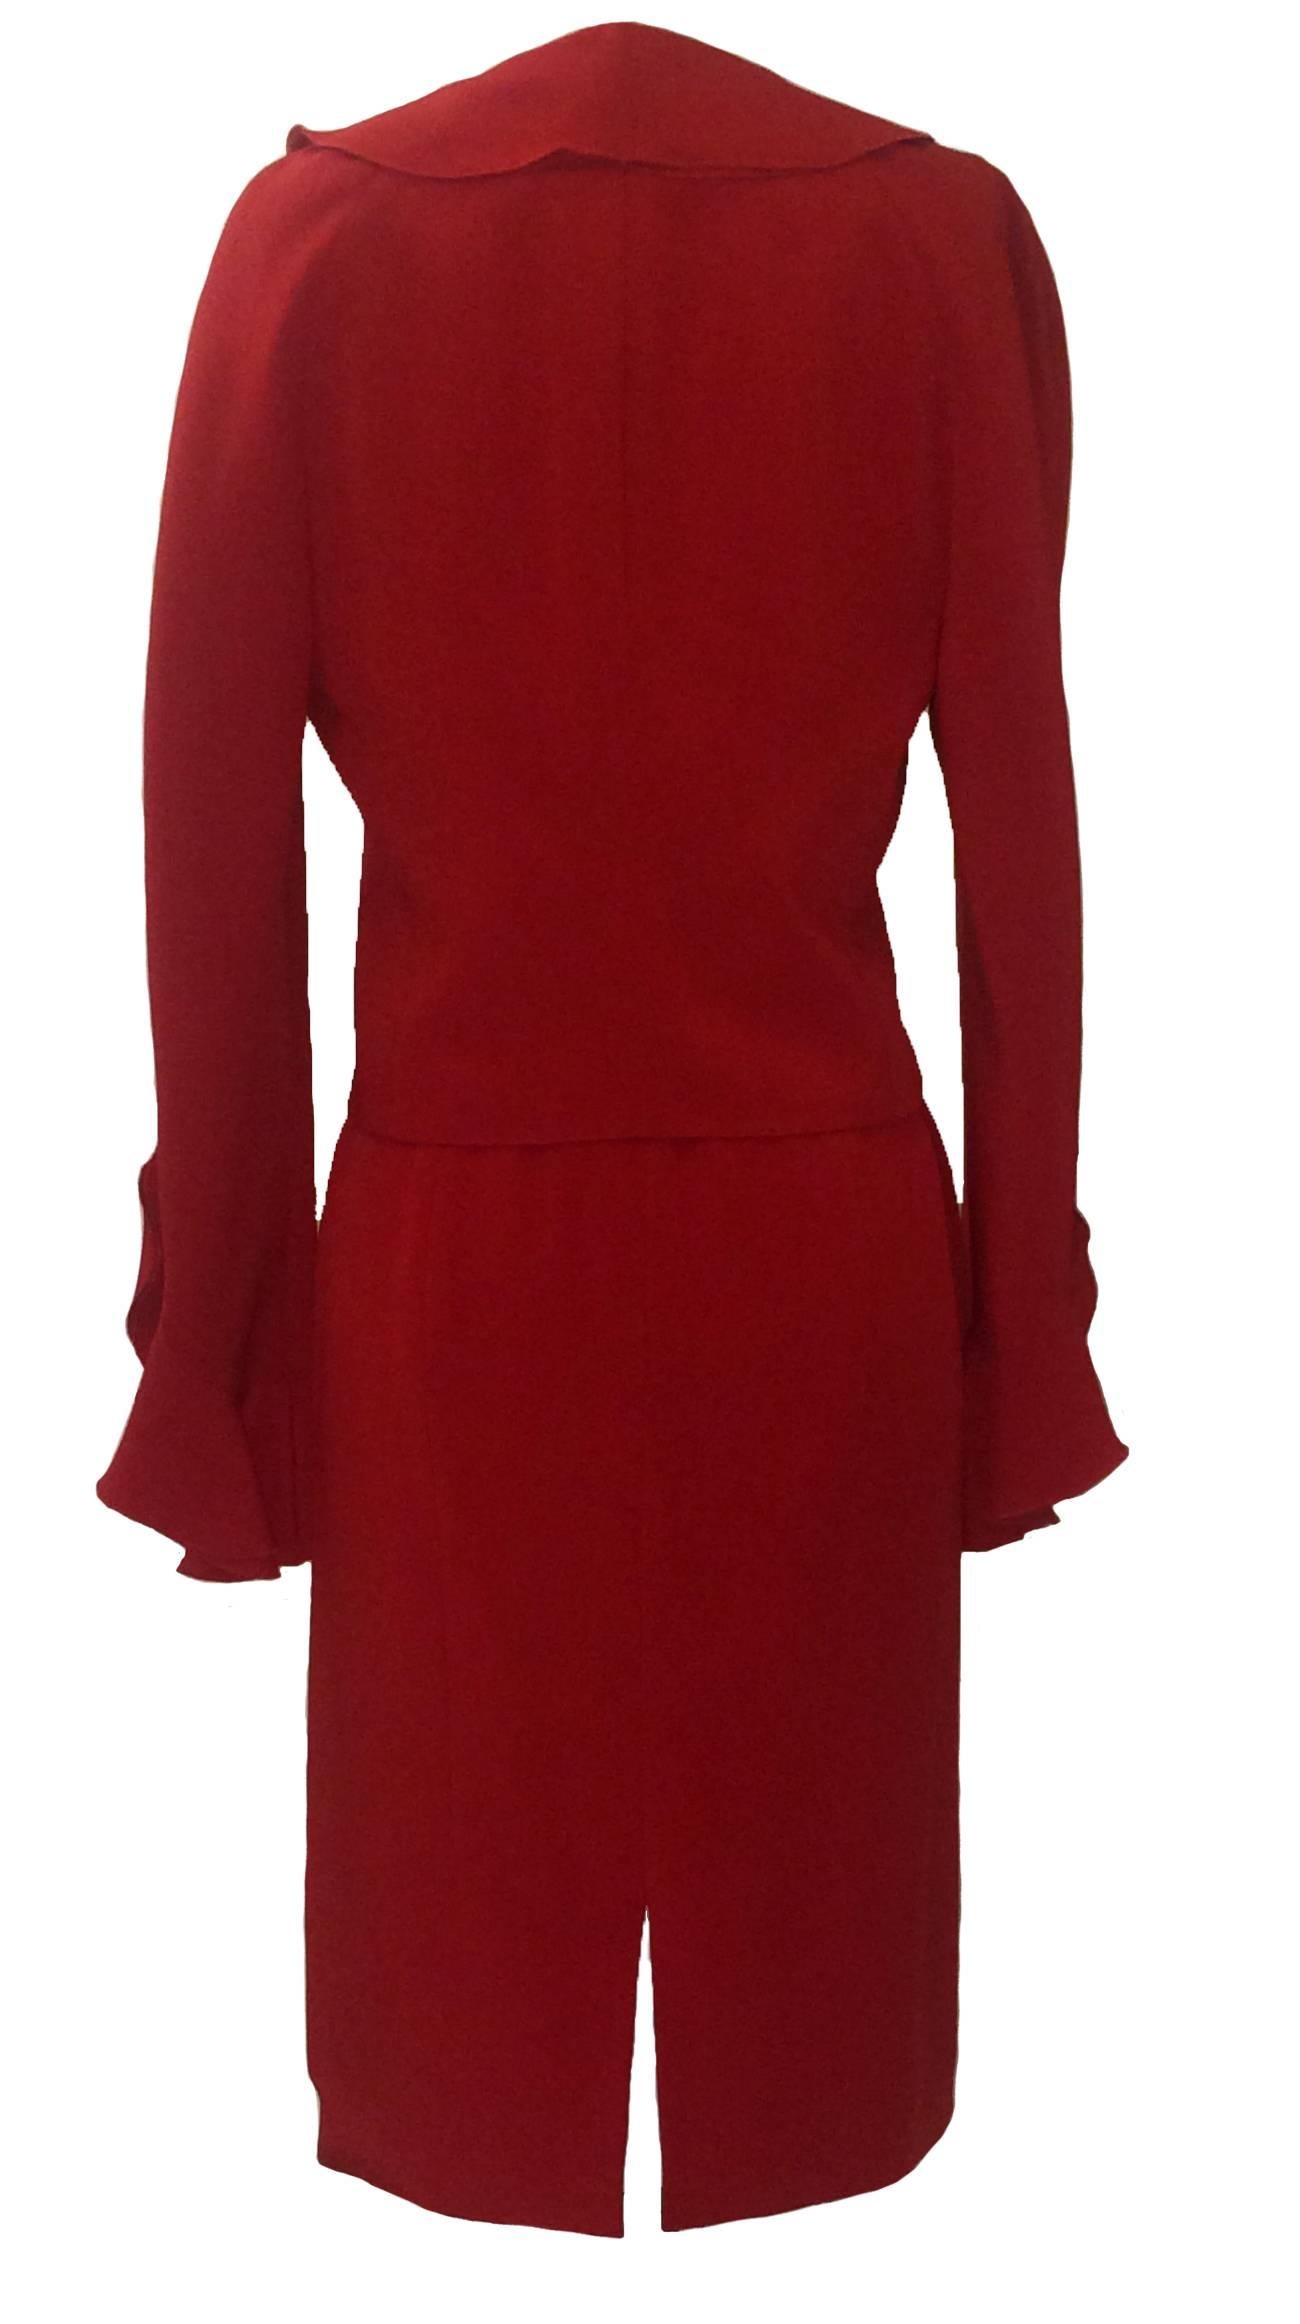 Valentino ruffle detail skirt suit in lipstick red. Button front jacket, back zip on skirt. 

60% acetate, 40% silk.
Jacket lined in same, skirt lined in 100% polyester.

Made in Italy.

Size 8. Runs small, see measurements.
Bust